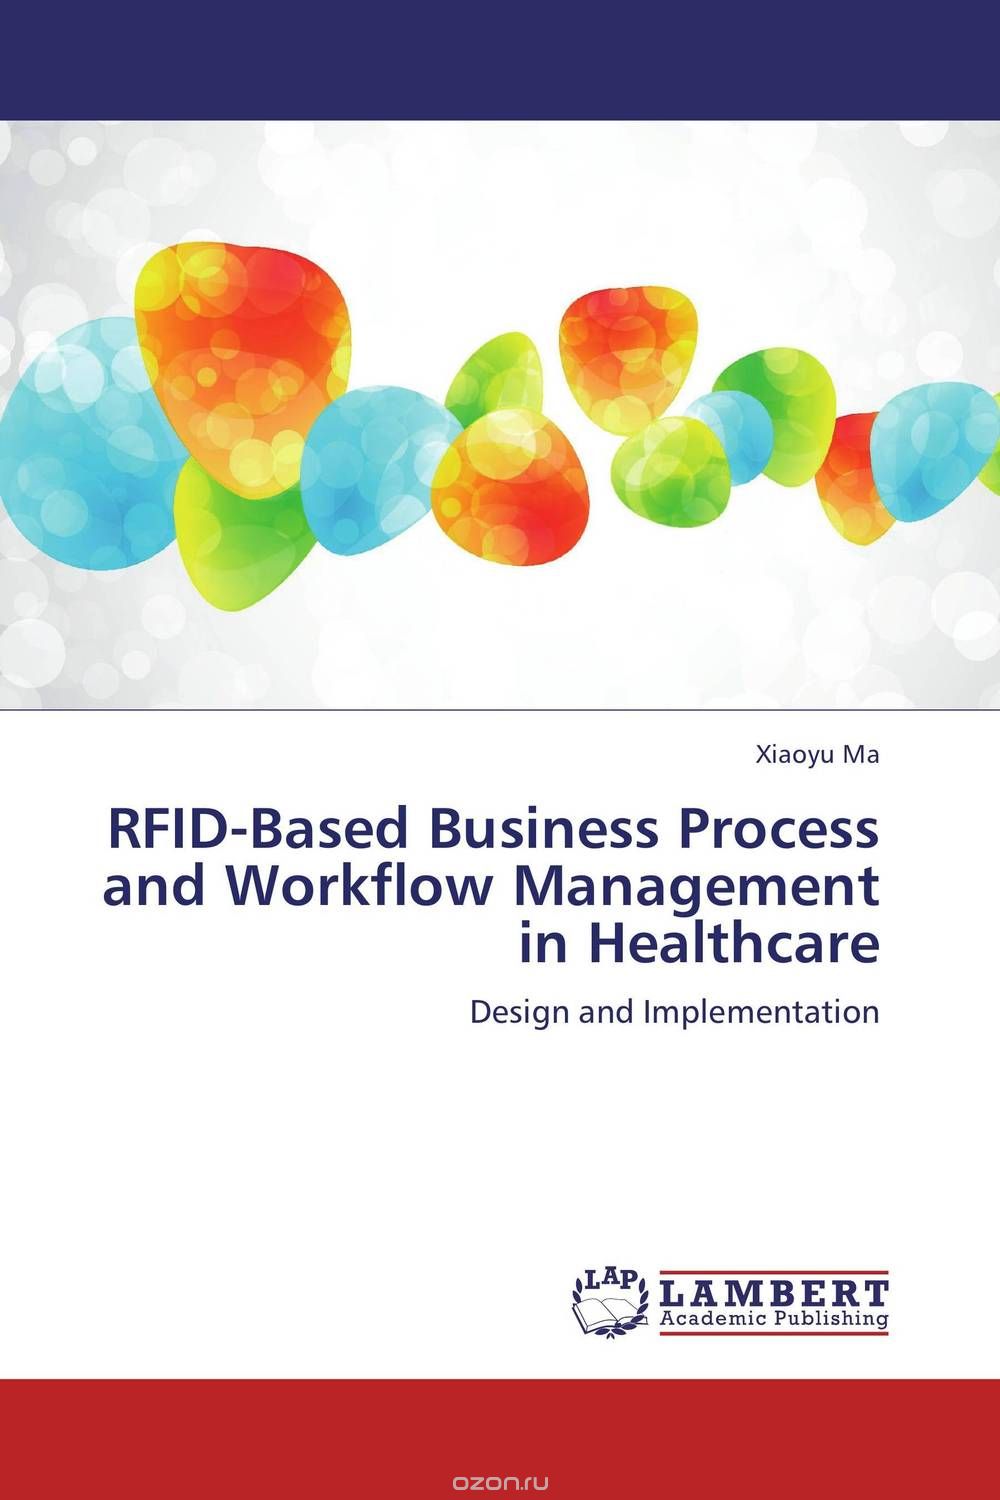 Скачать книгу "RFID-Based Business Process and Workflow Management in Healthcare"